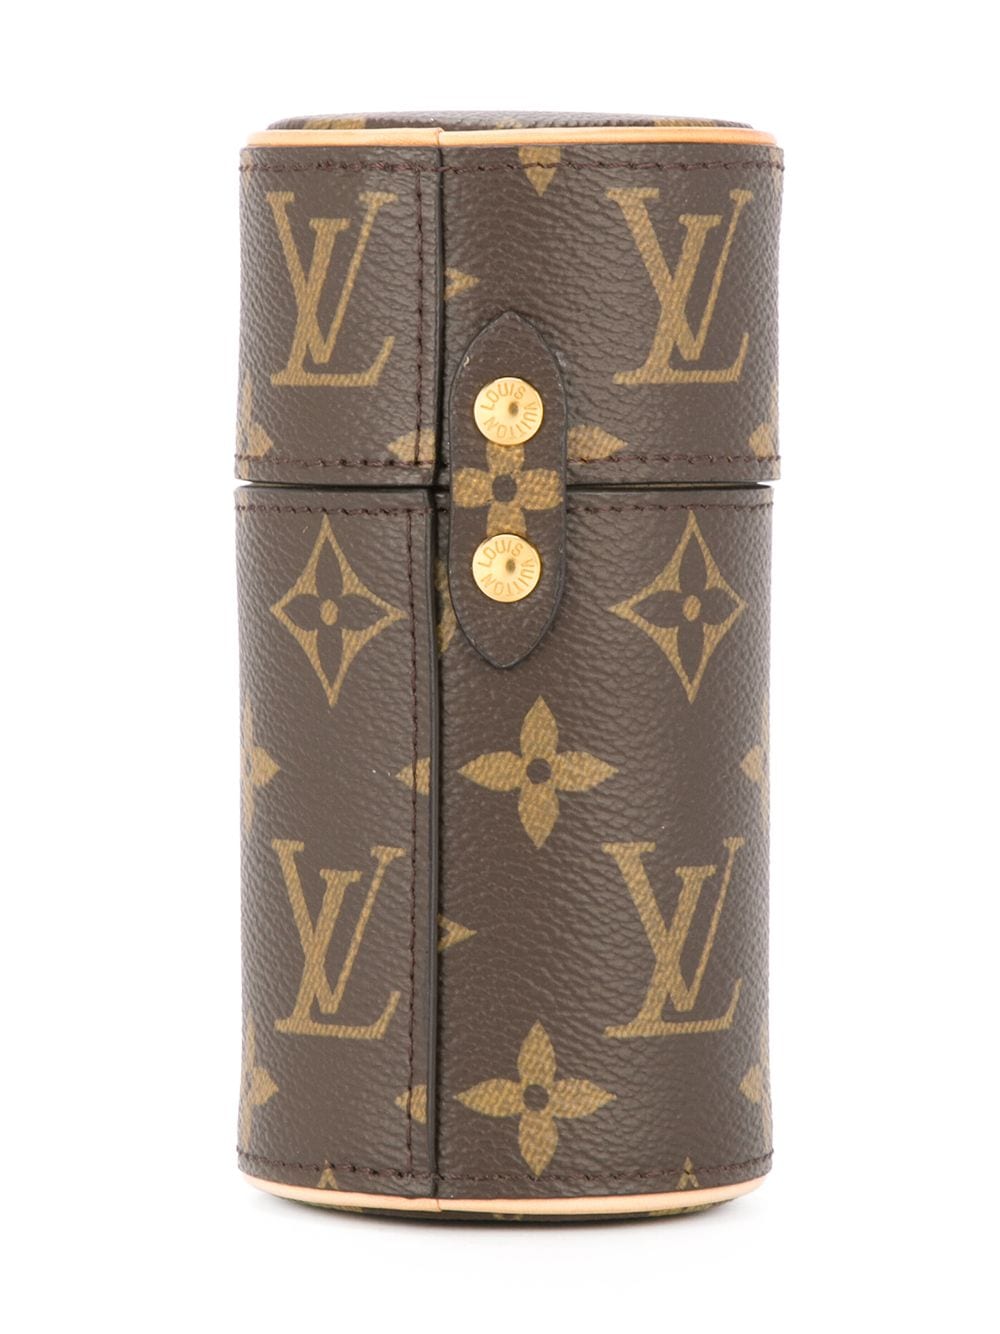 Louis Vuitton Perfume Case and Pouch Bag in Nomade Leather Perfume